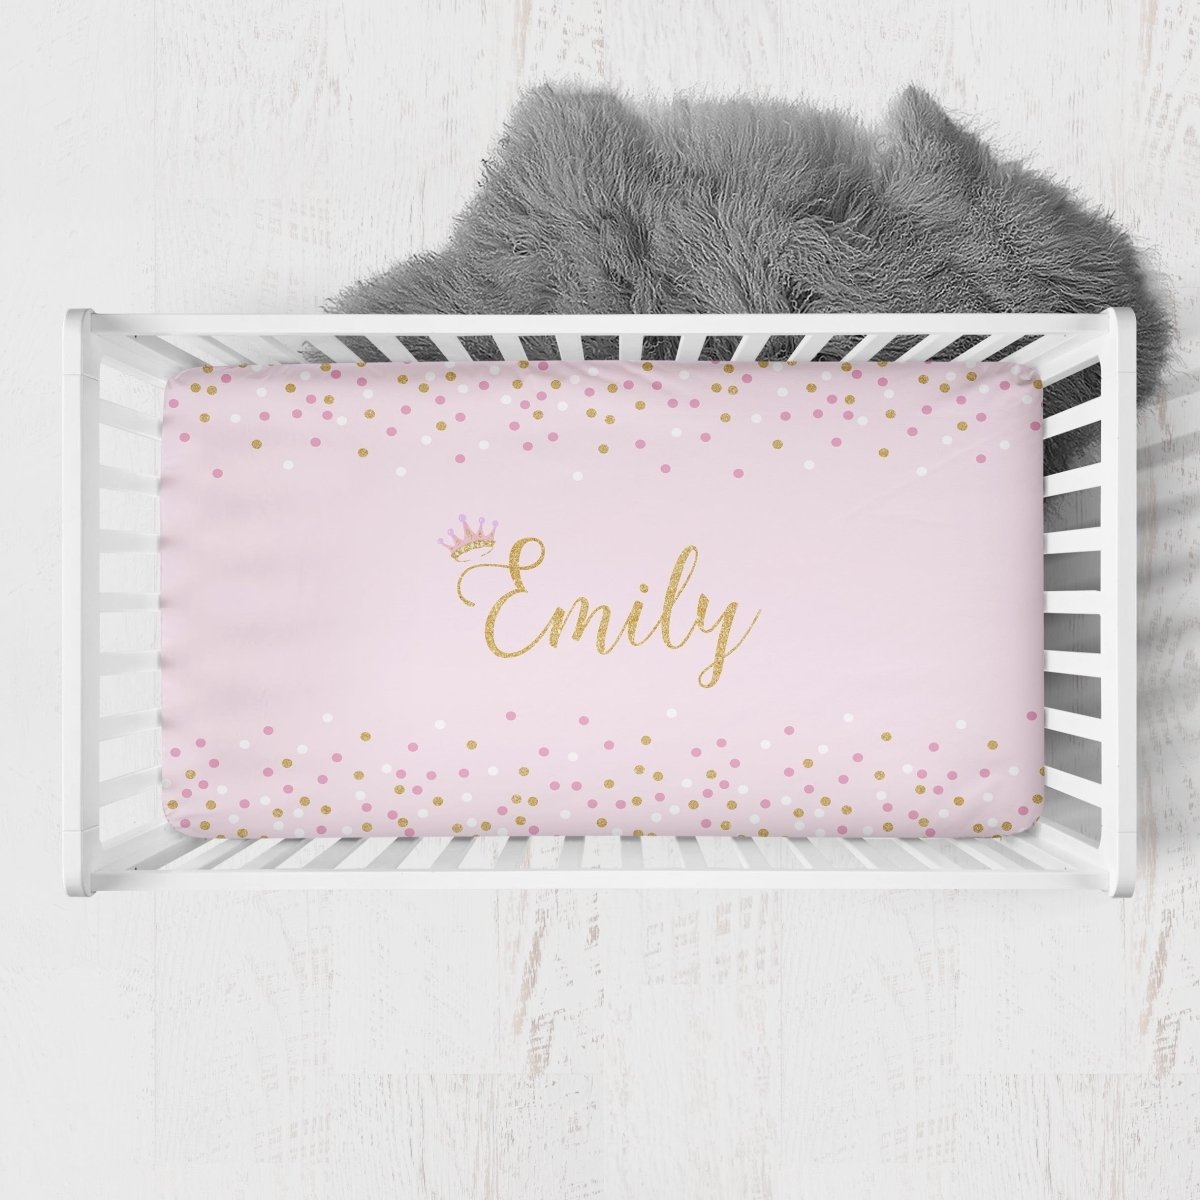 Pink Princess Personalized Crib Sheet - gender_girl, Personalized_Yes, text